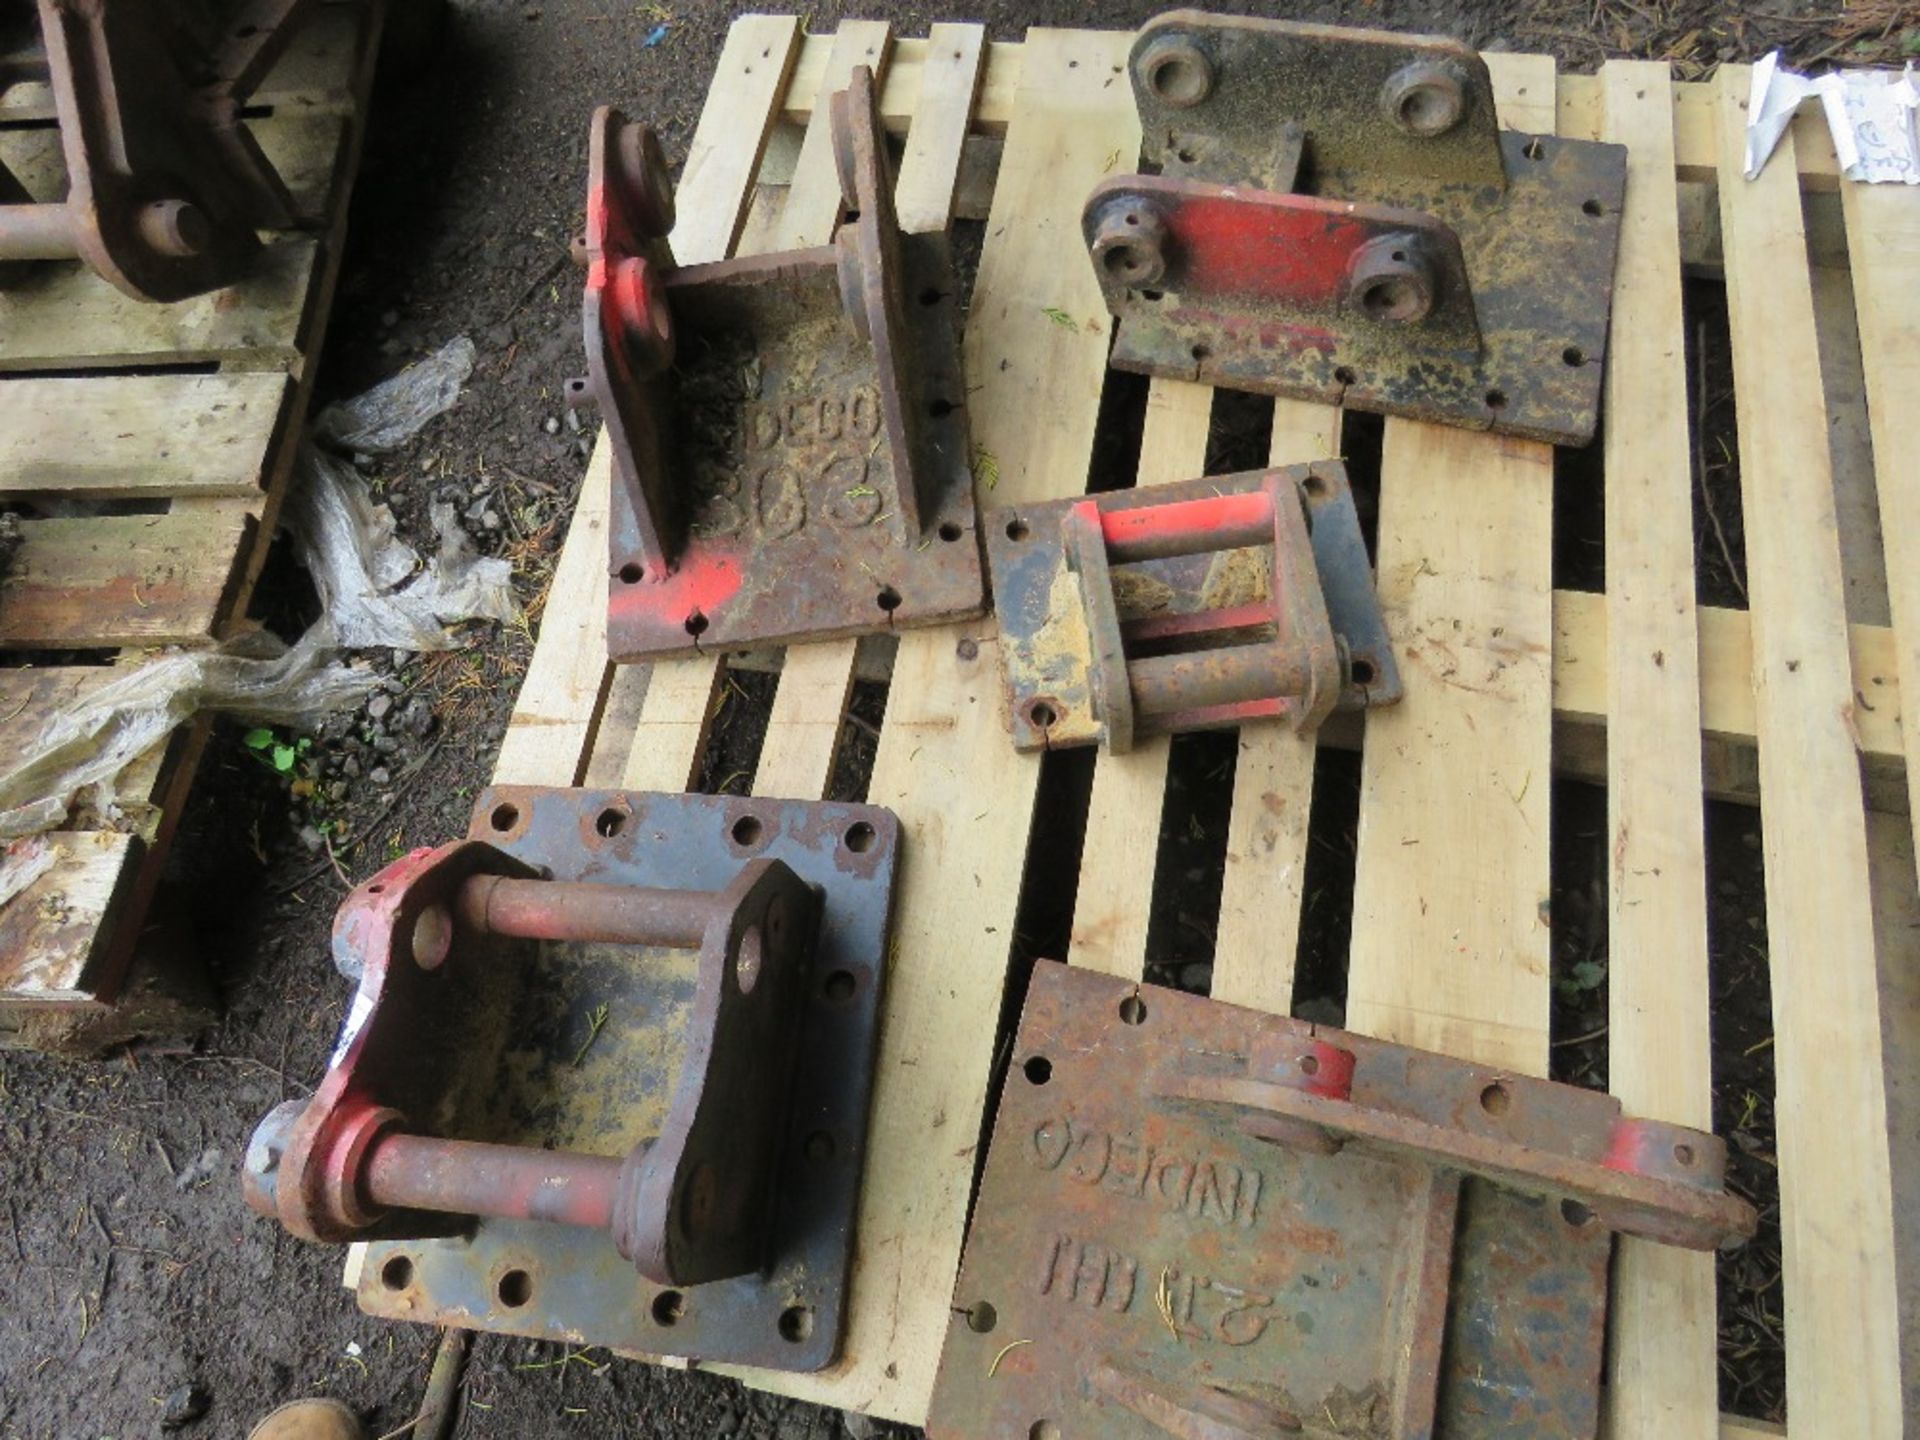 5 X EXCAVATOR BREAKER MOUNTING PLATES / HEADSTOCKS. SOURCED FROM MAJOR UK ROADS CONTRACTOR. - Image 2 of 3